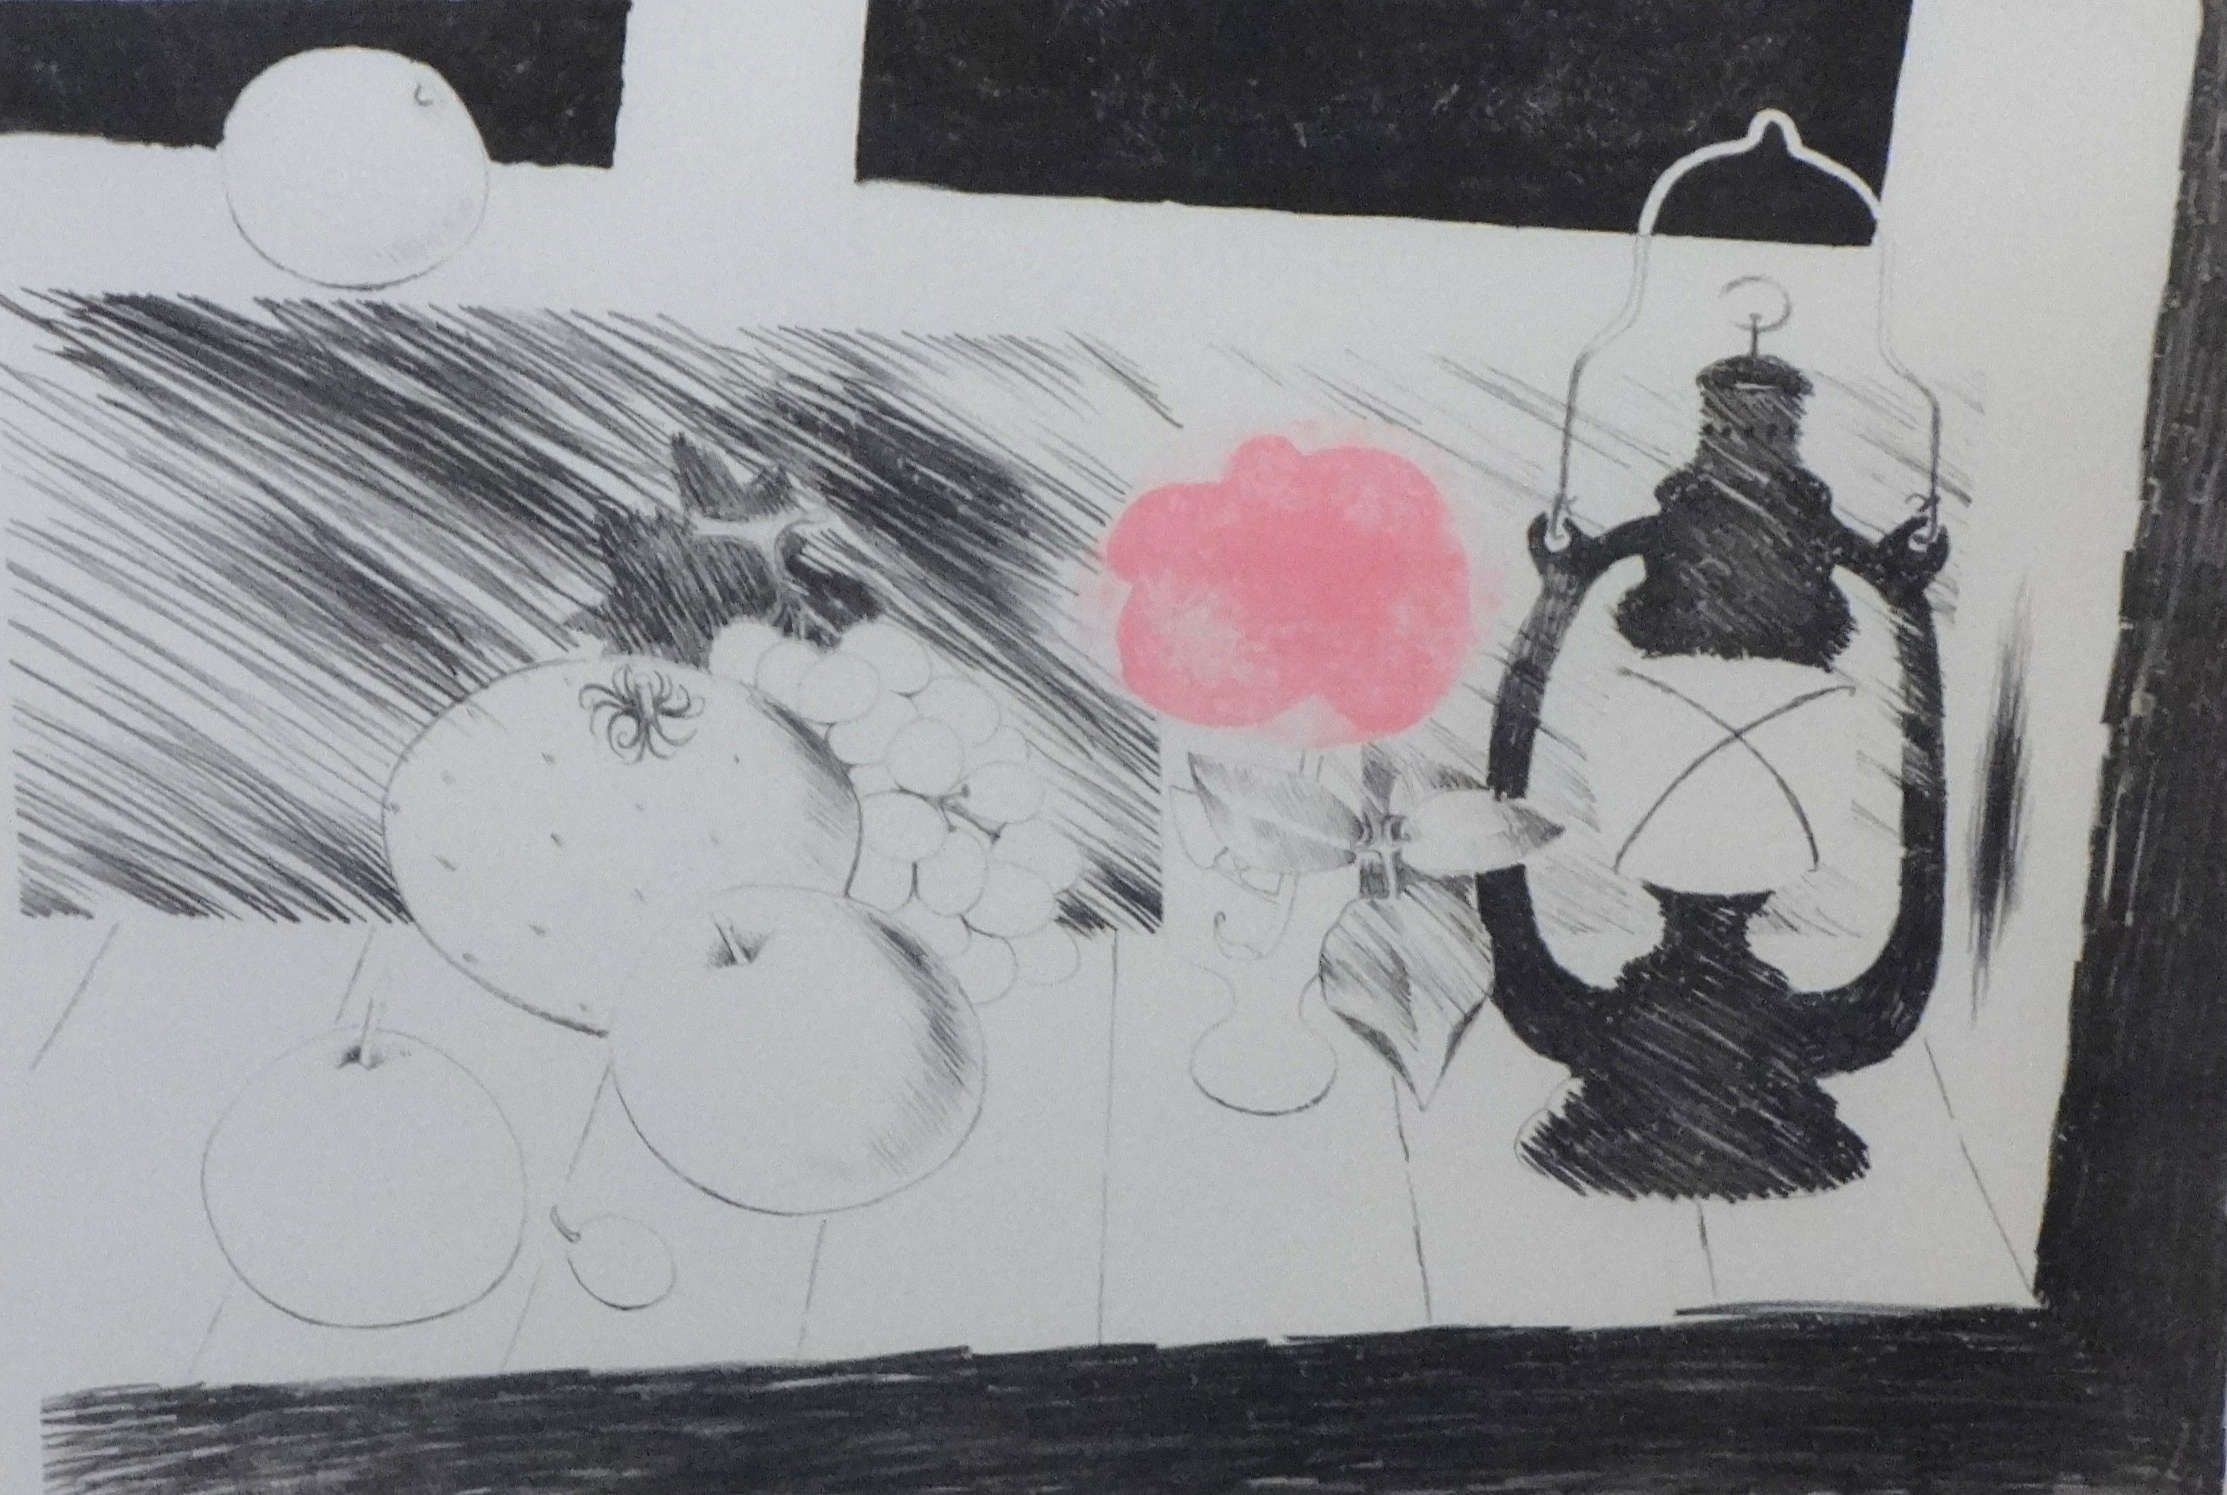 MARY FEDDEN (1915-2012) 'Lamplight' signed limited edition lithograph 21/70, 47cm x 63cm, Archeus